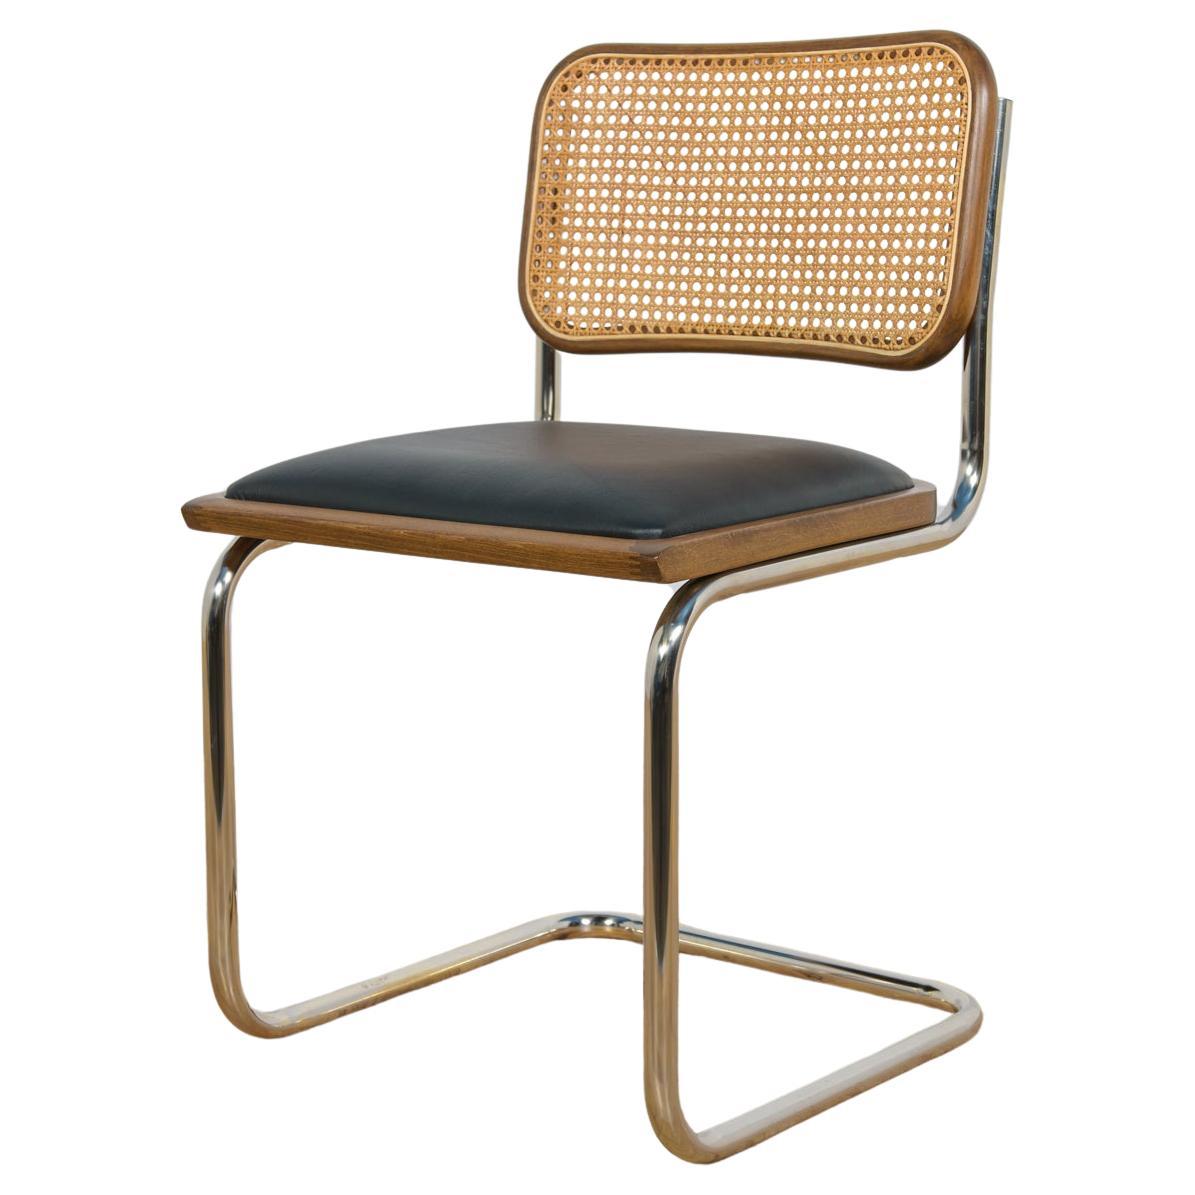 Chrome-Plated Chair Type Cesca, Italy, 1980s For Sale